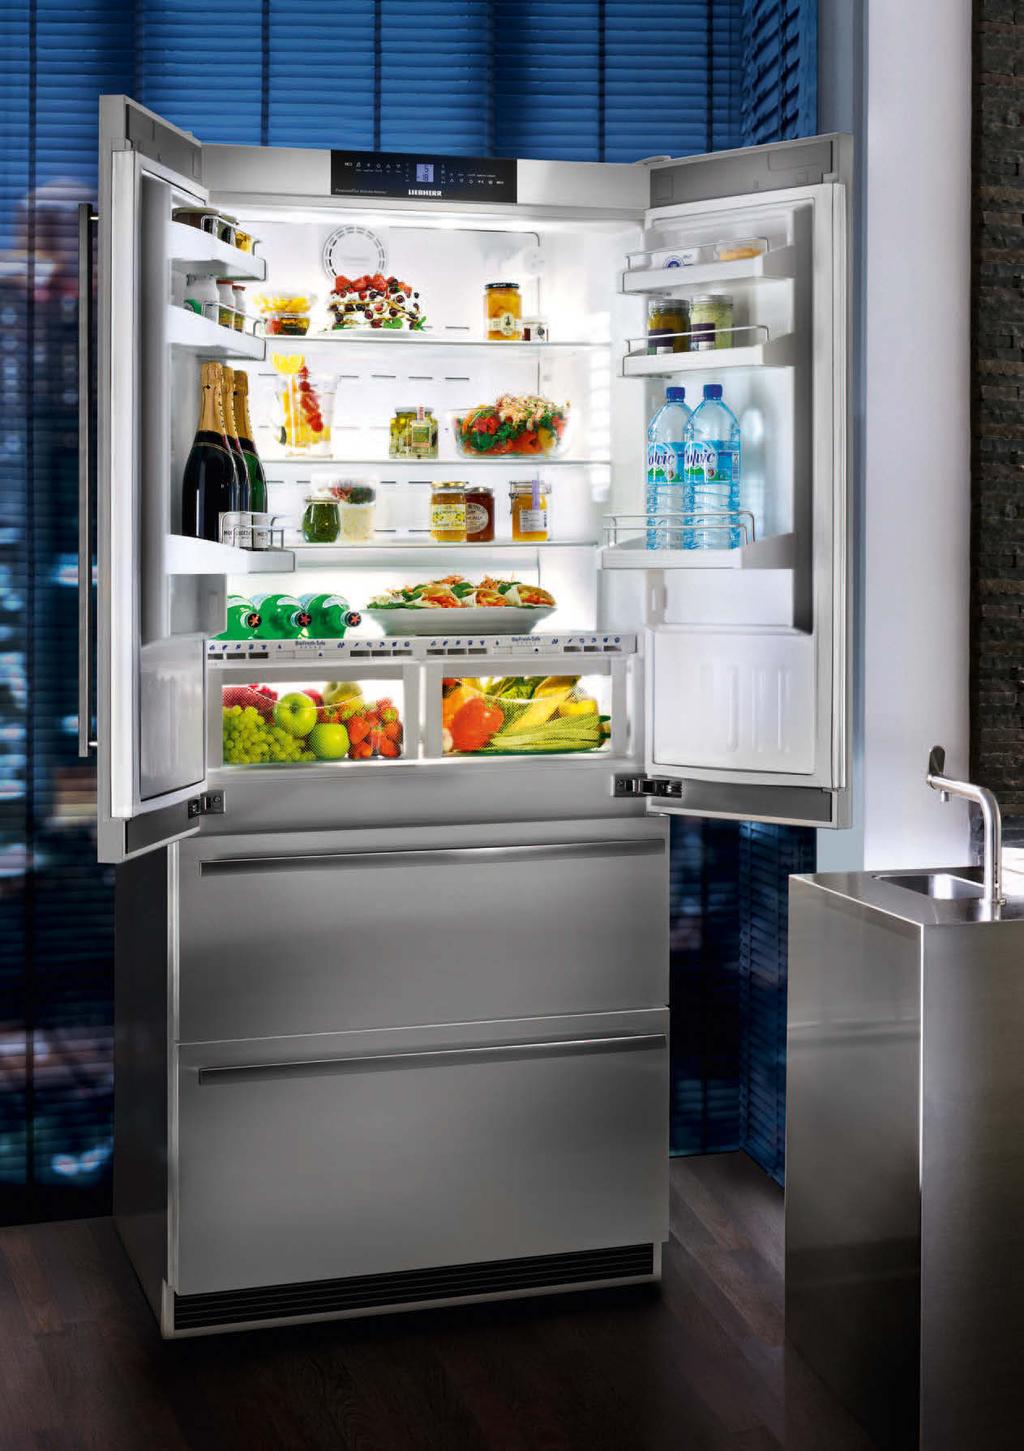 Frenchdoor fridge-freezer with BioFresh and NoFrost: CBNes 656 The Food Storage Centre CBNes 656 with its elegant Frenchdoor concept is a focal point in any kitchen, open or closed.